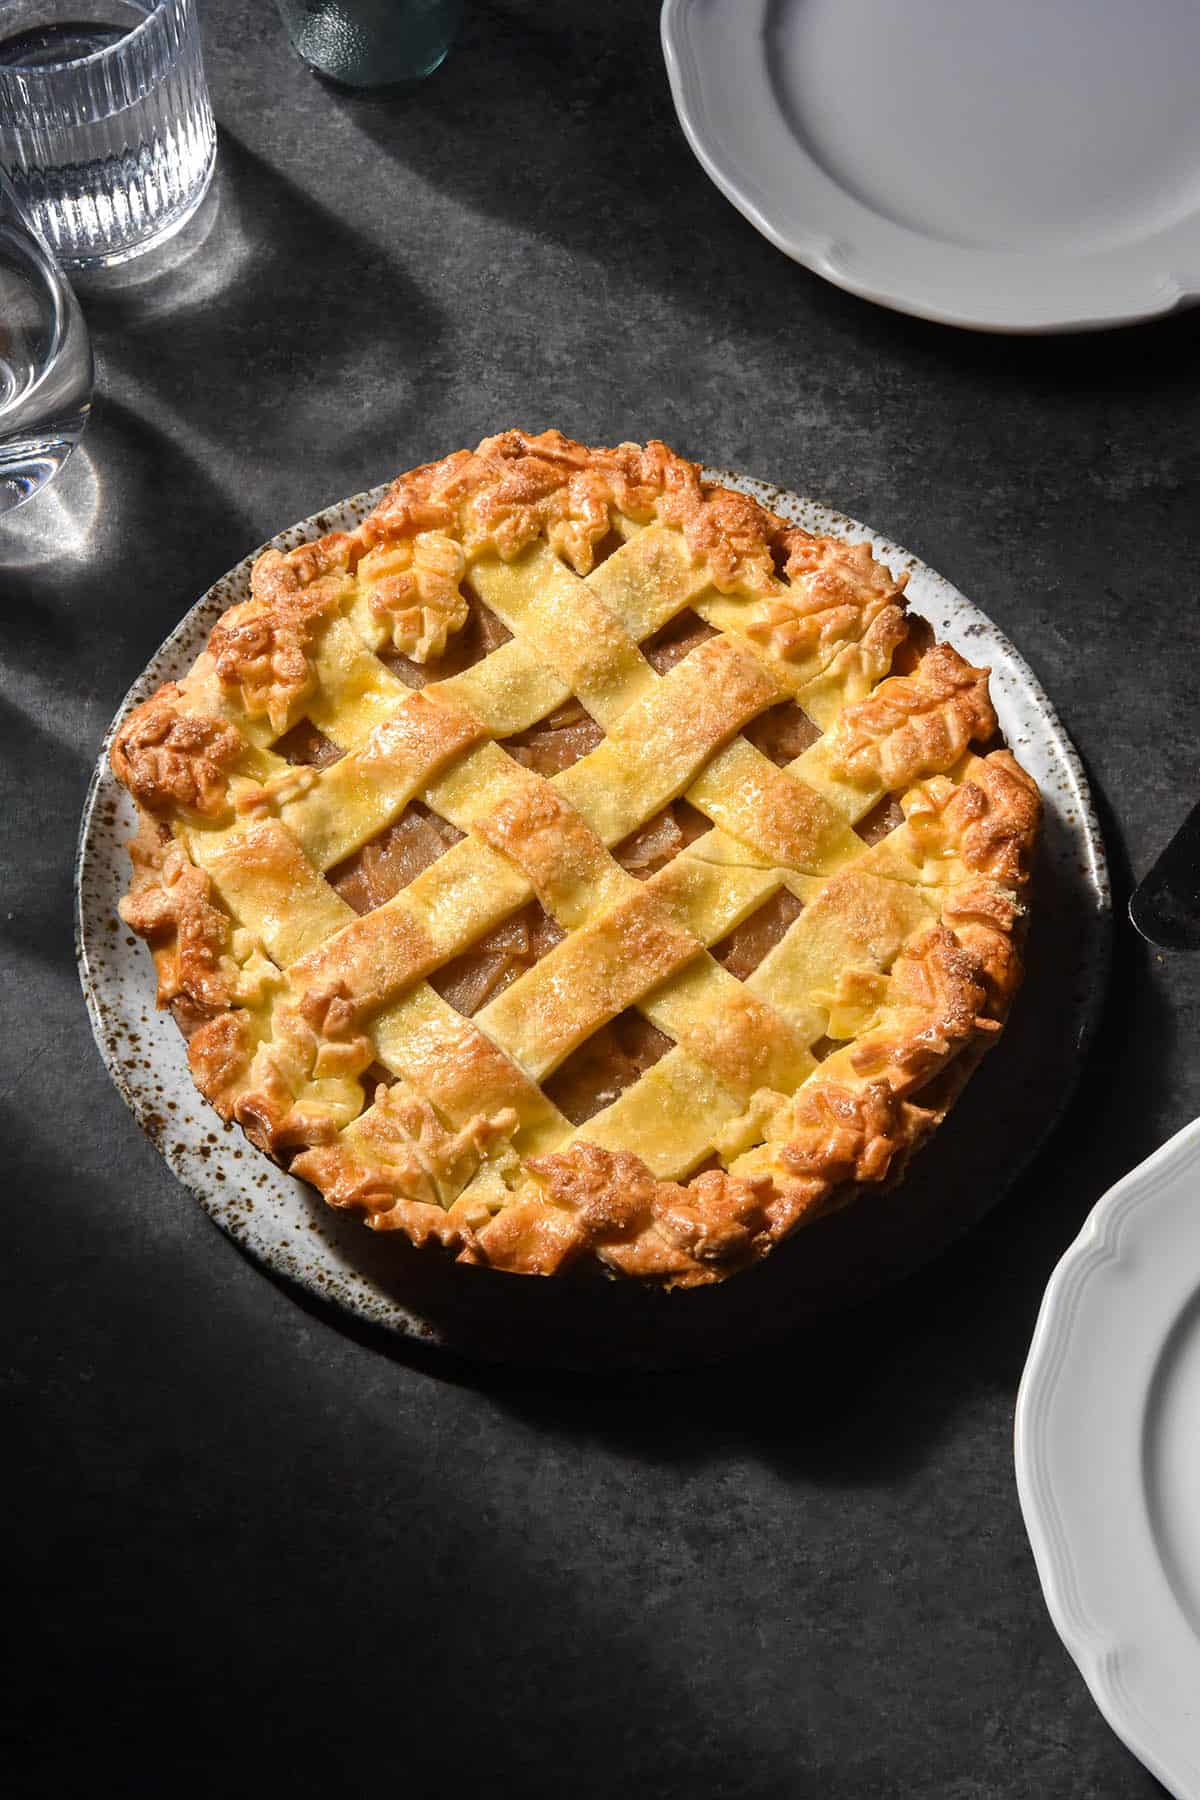 A dark and moody aerial image of a low FODMAP apple pie with a lattice top and pastry leaf decor around the edges. The pie sits on a white speckled ceramic plate atop a dark backdrop. It is surrounded by plates and sunlit glasses of water.